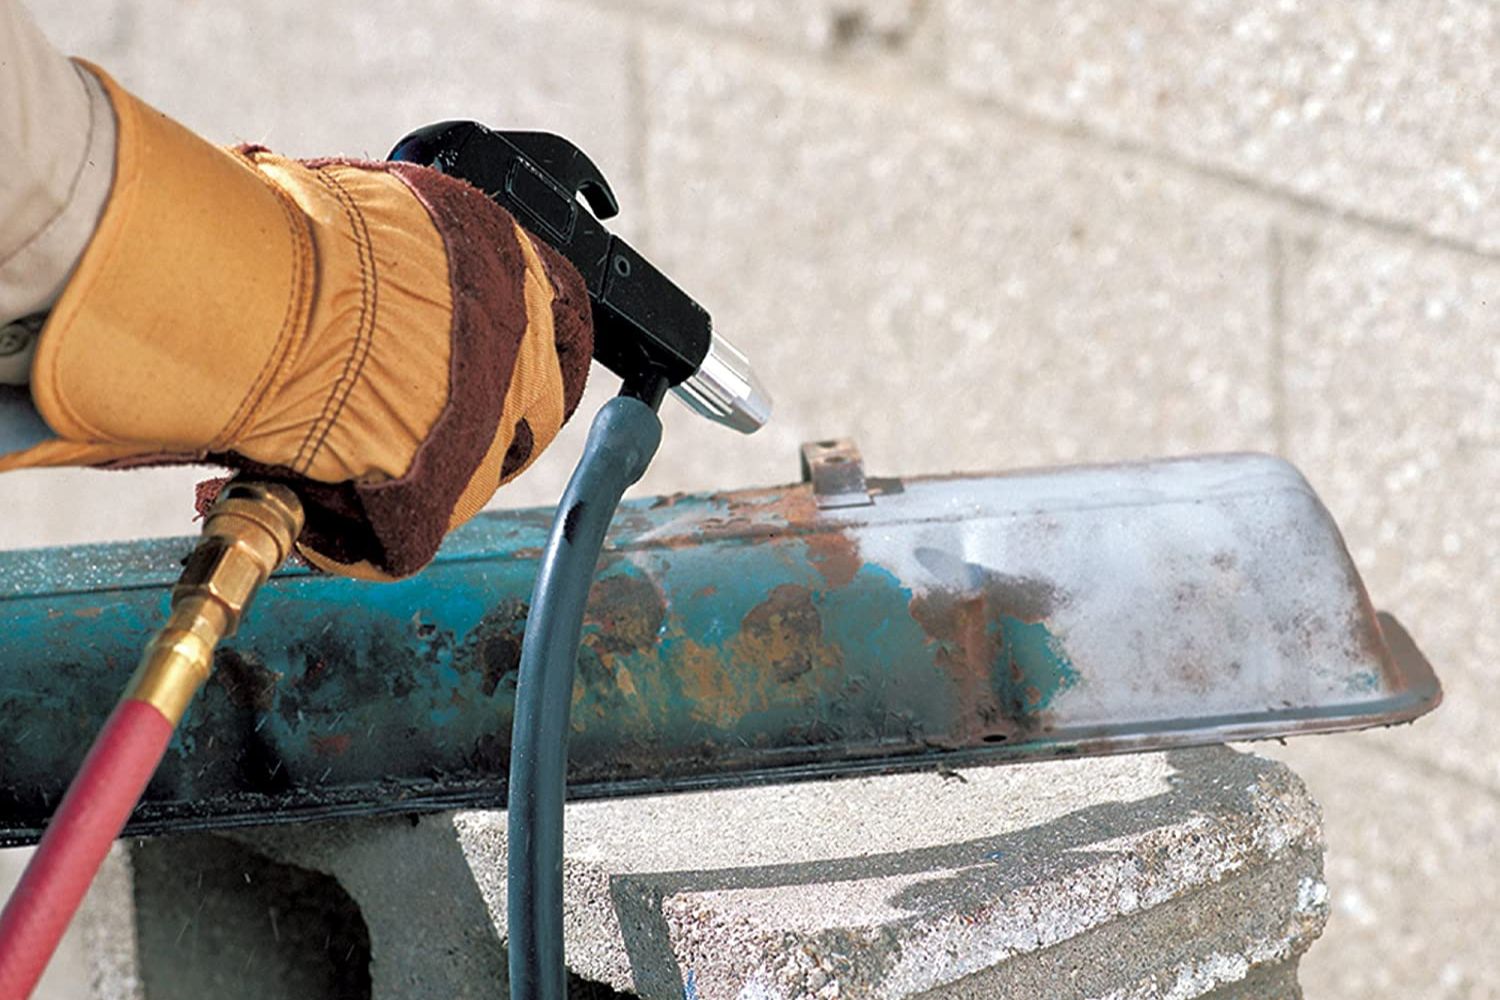 A person using the best sandblaster option to remove rust from metal